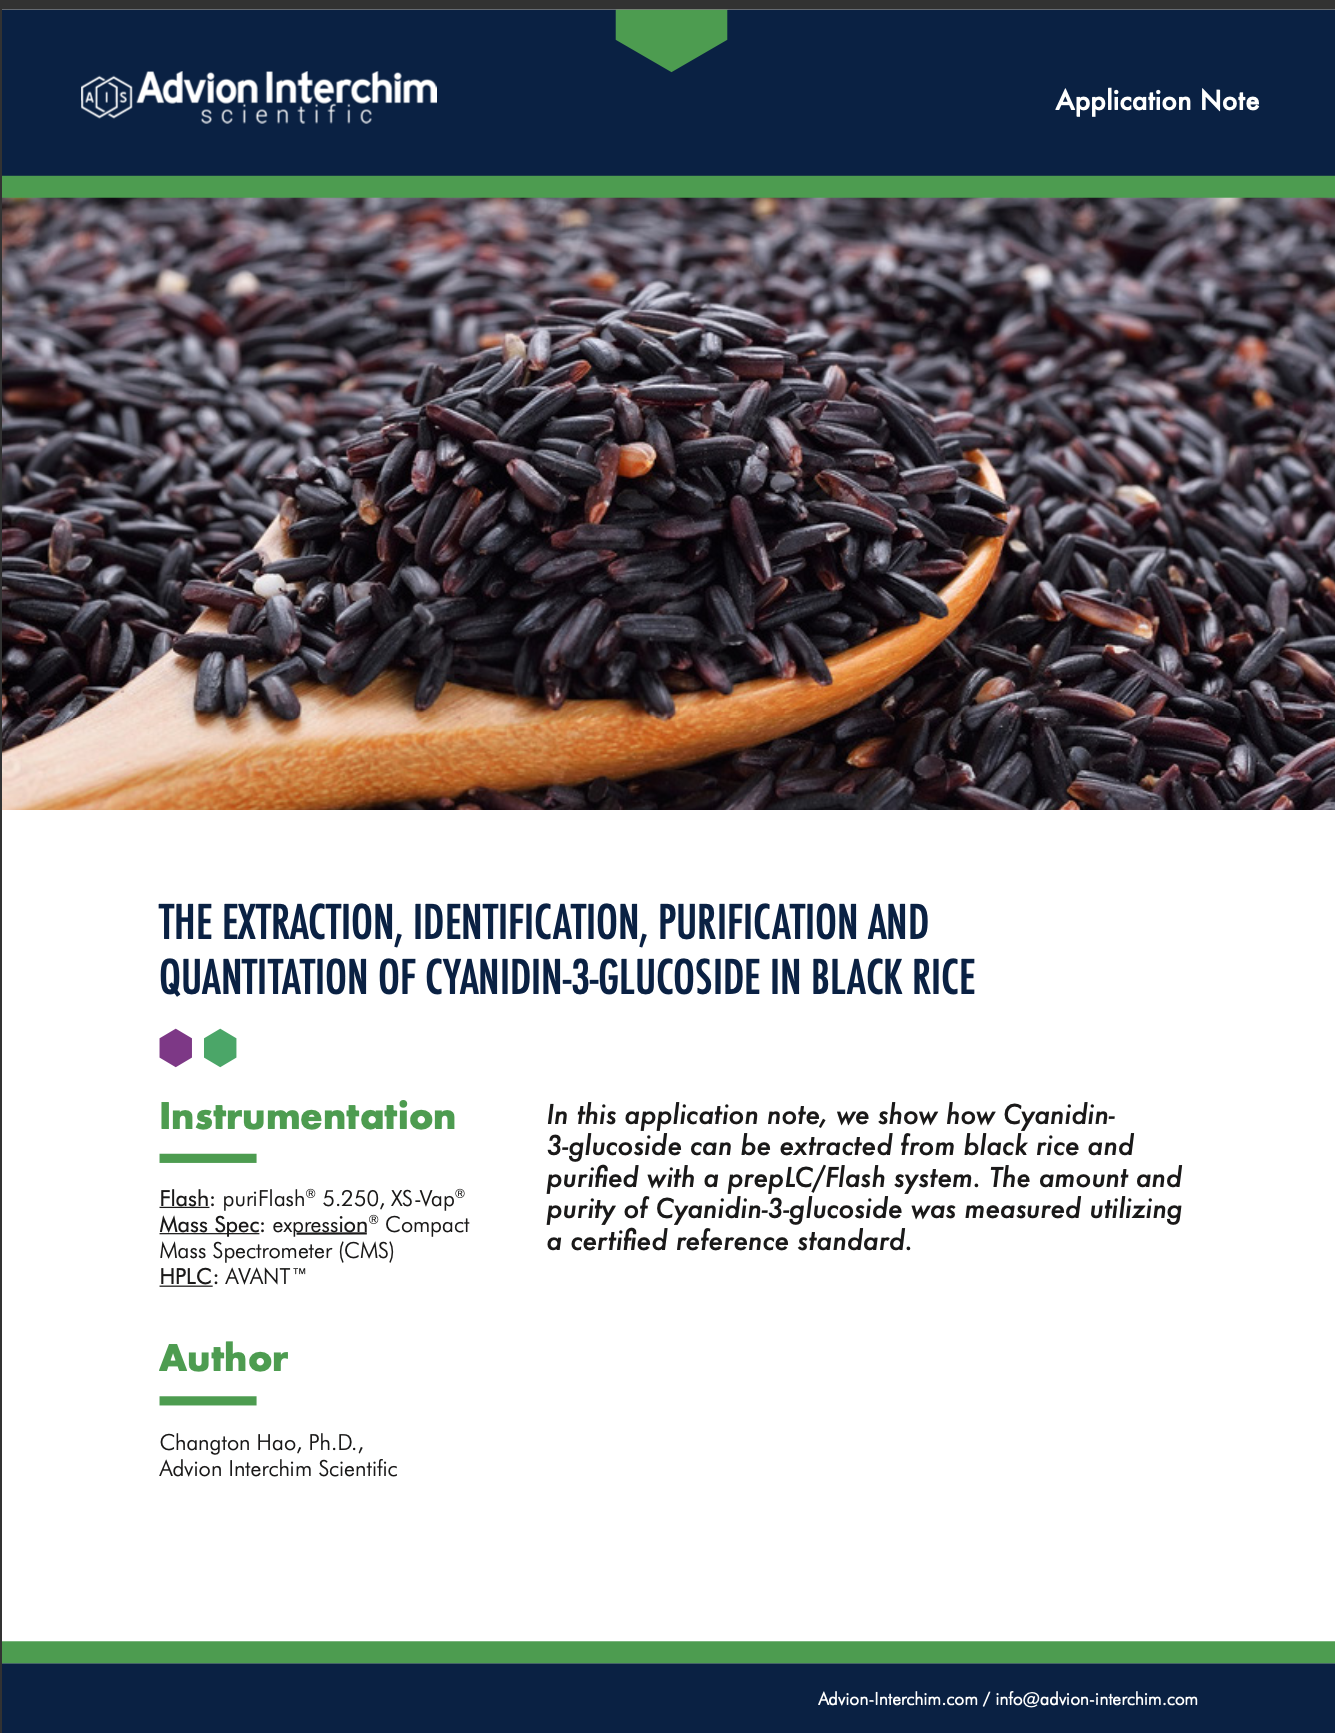 The Extraction, Identification, Purification and Quantitation of Cyanidin-3-glucoside in Black Rice